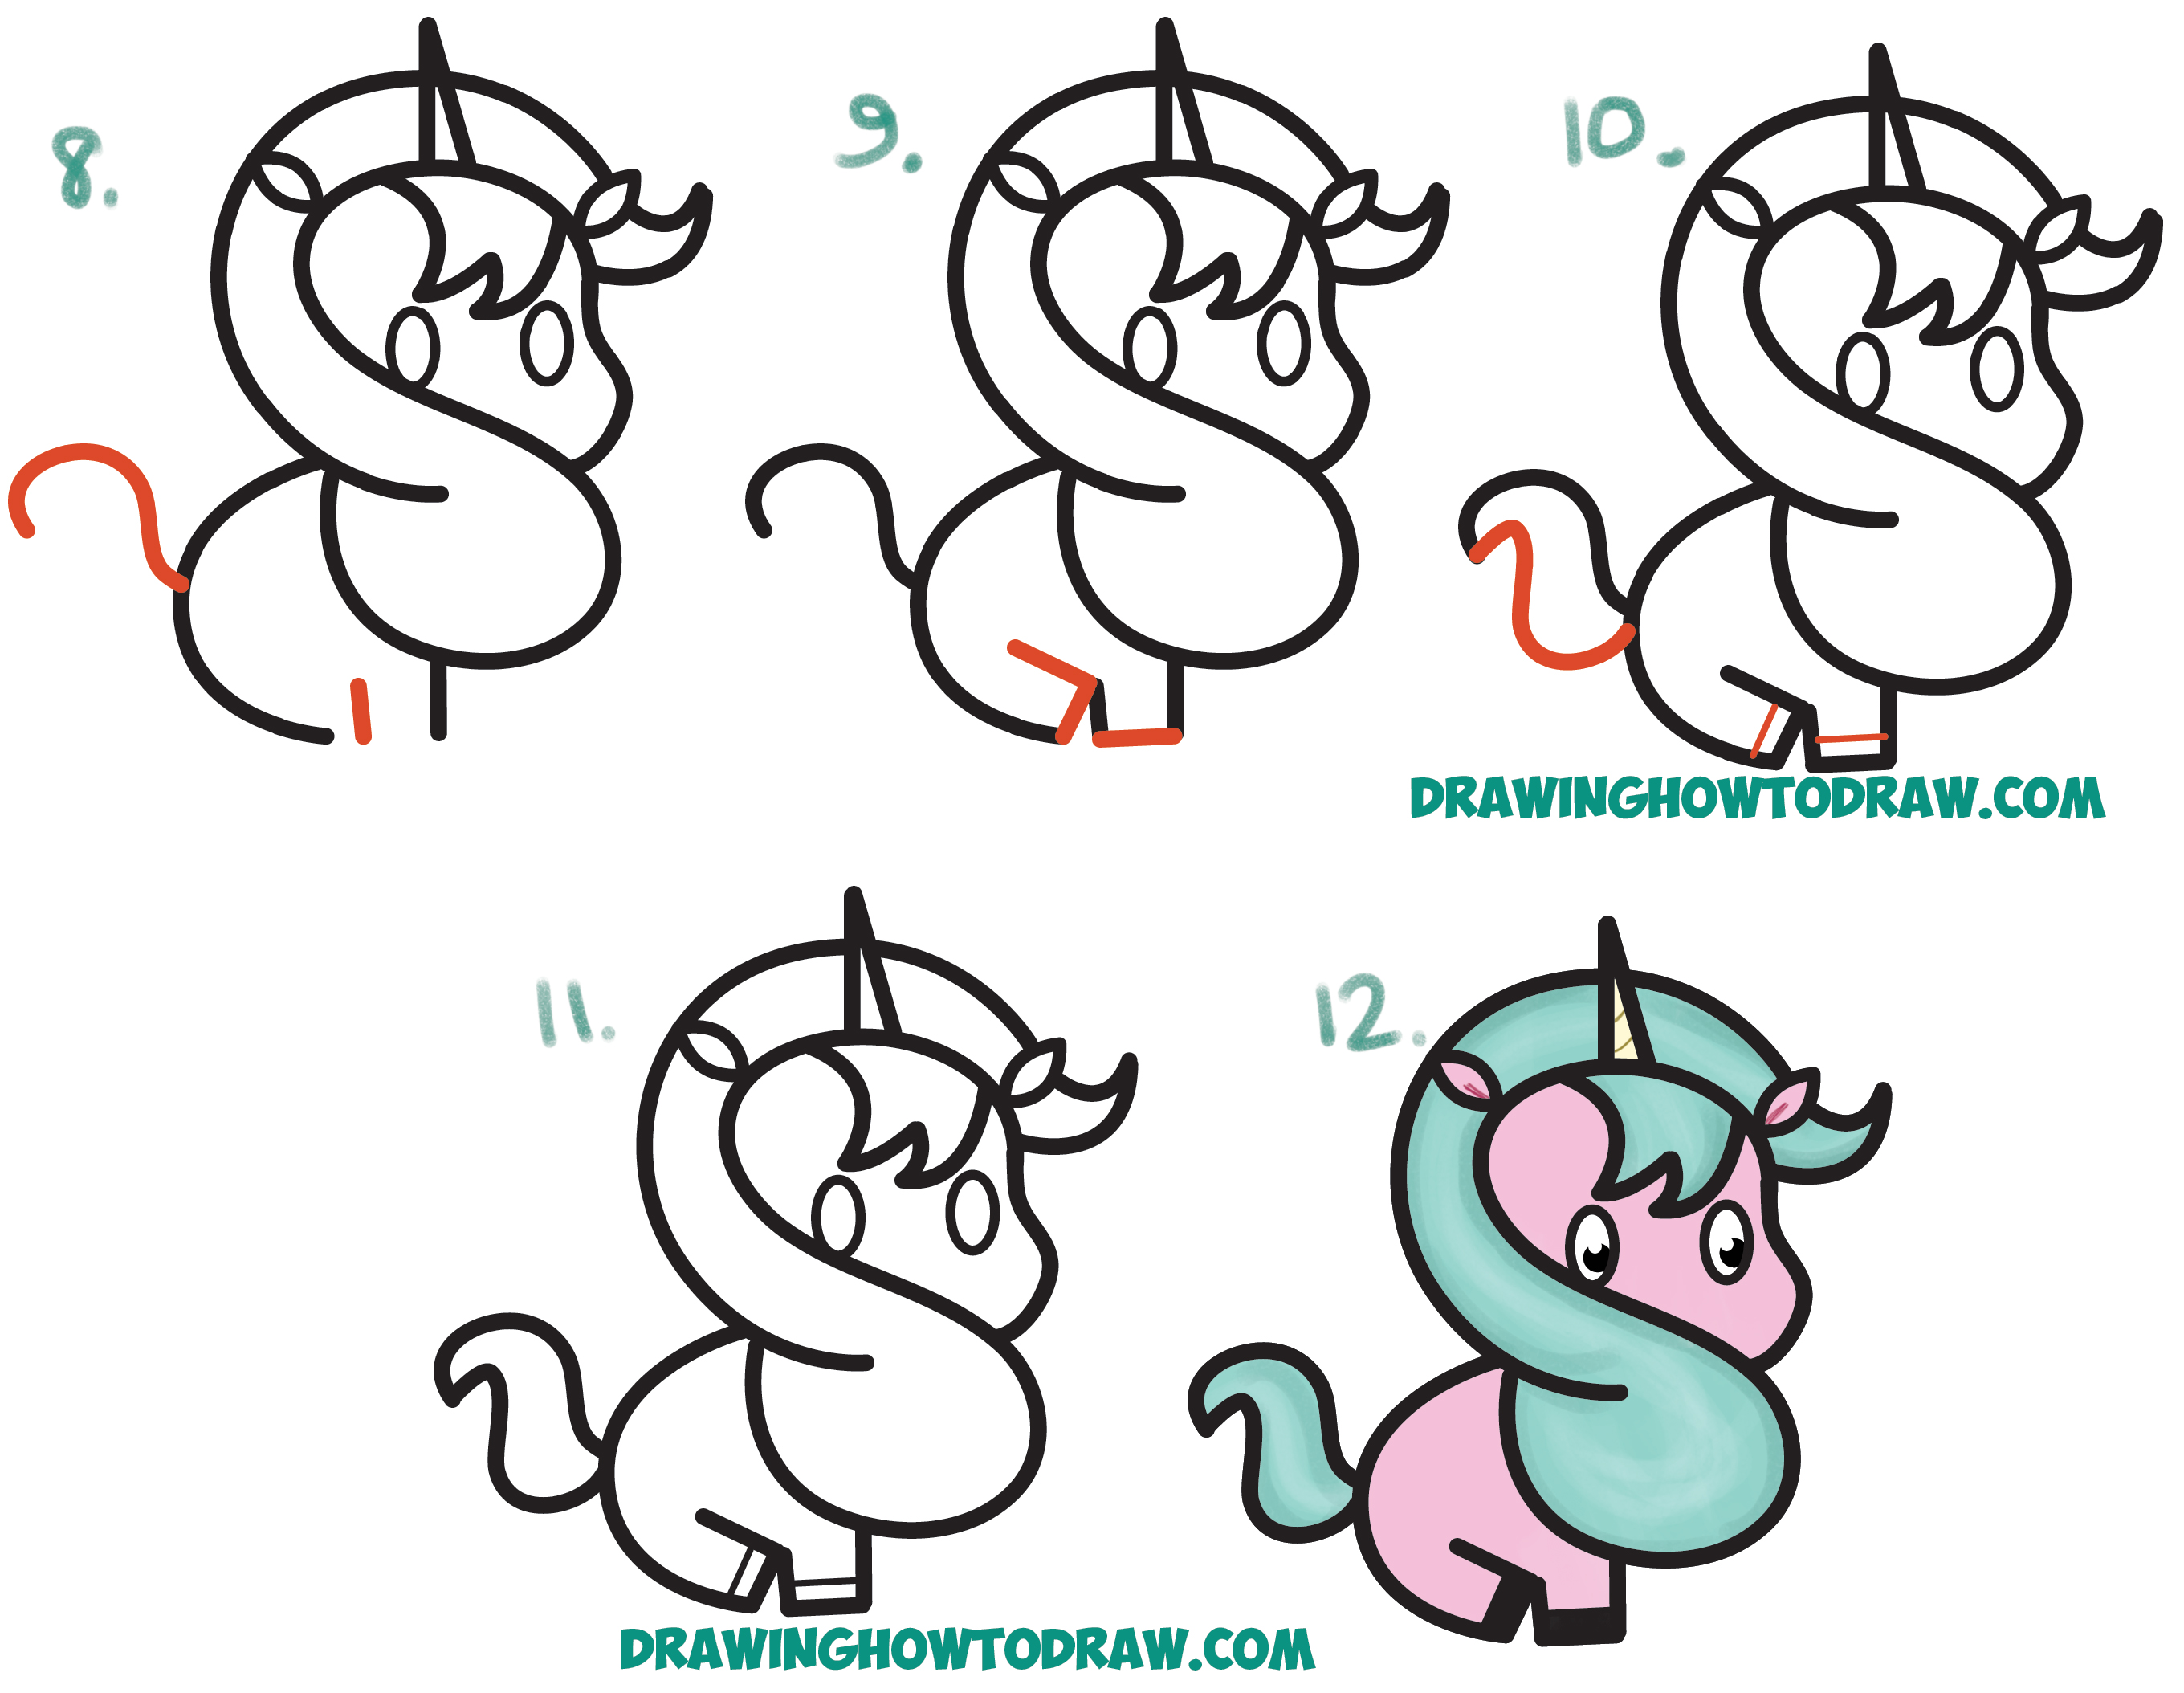 How To Draw A Cute Cartoon Unicorn Kawaii From A Dollar Sign Easy Step By Step Drawing